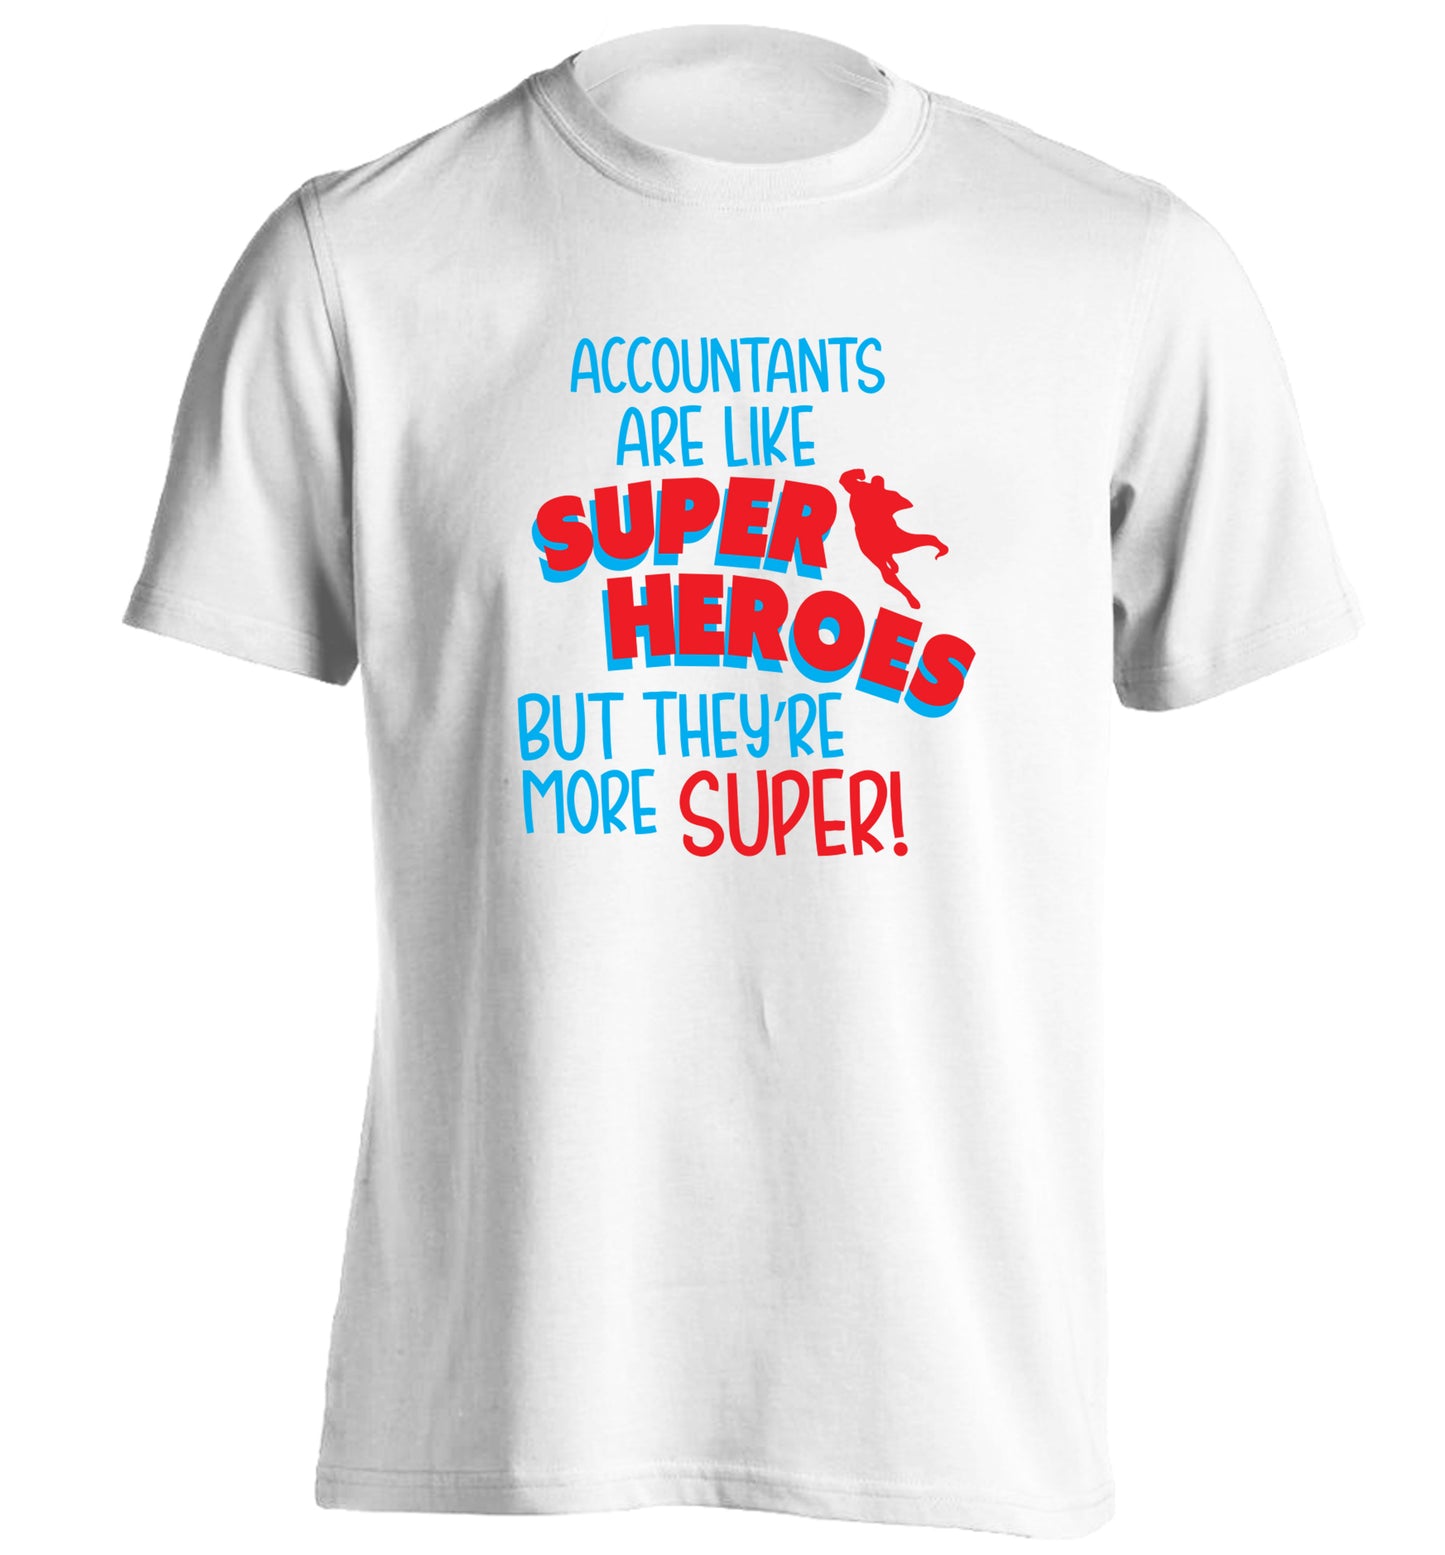 Accountants are like superheroes but they're more super adults unisex white Tshirt 2XL